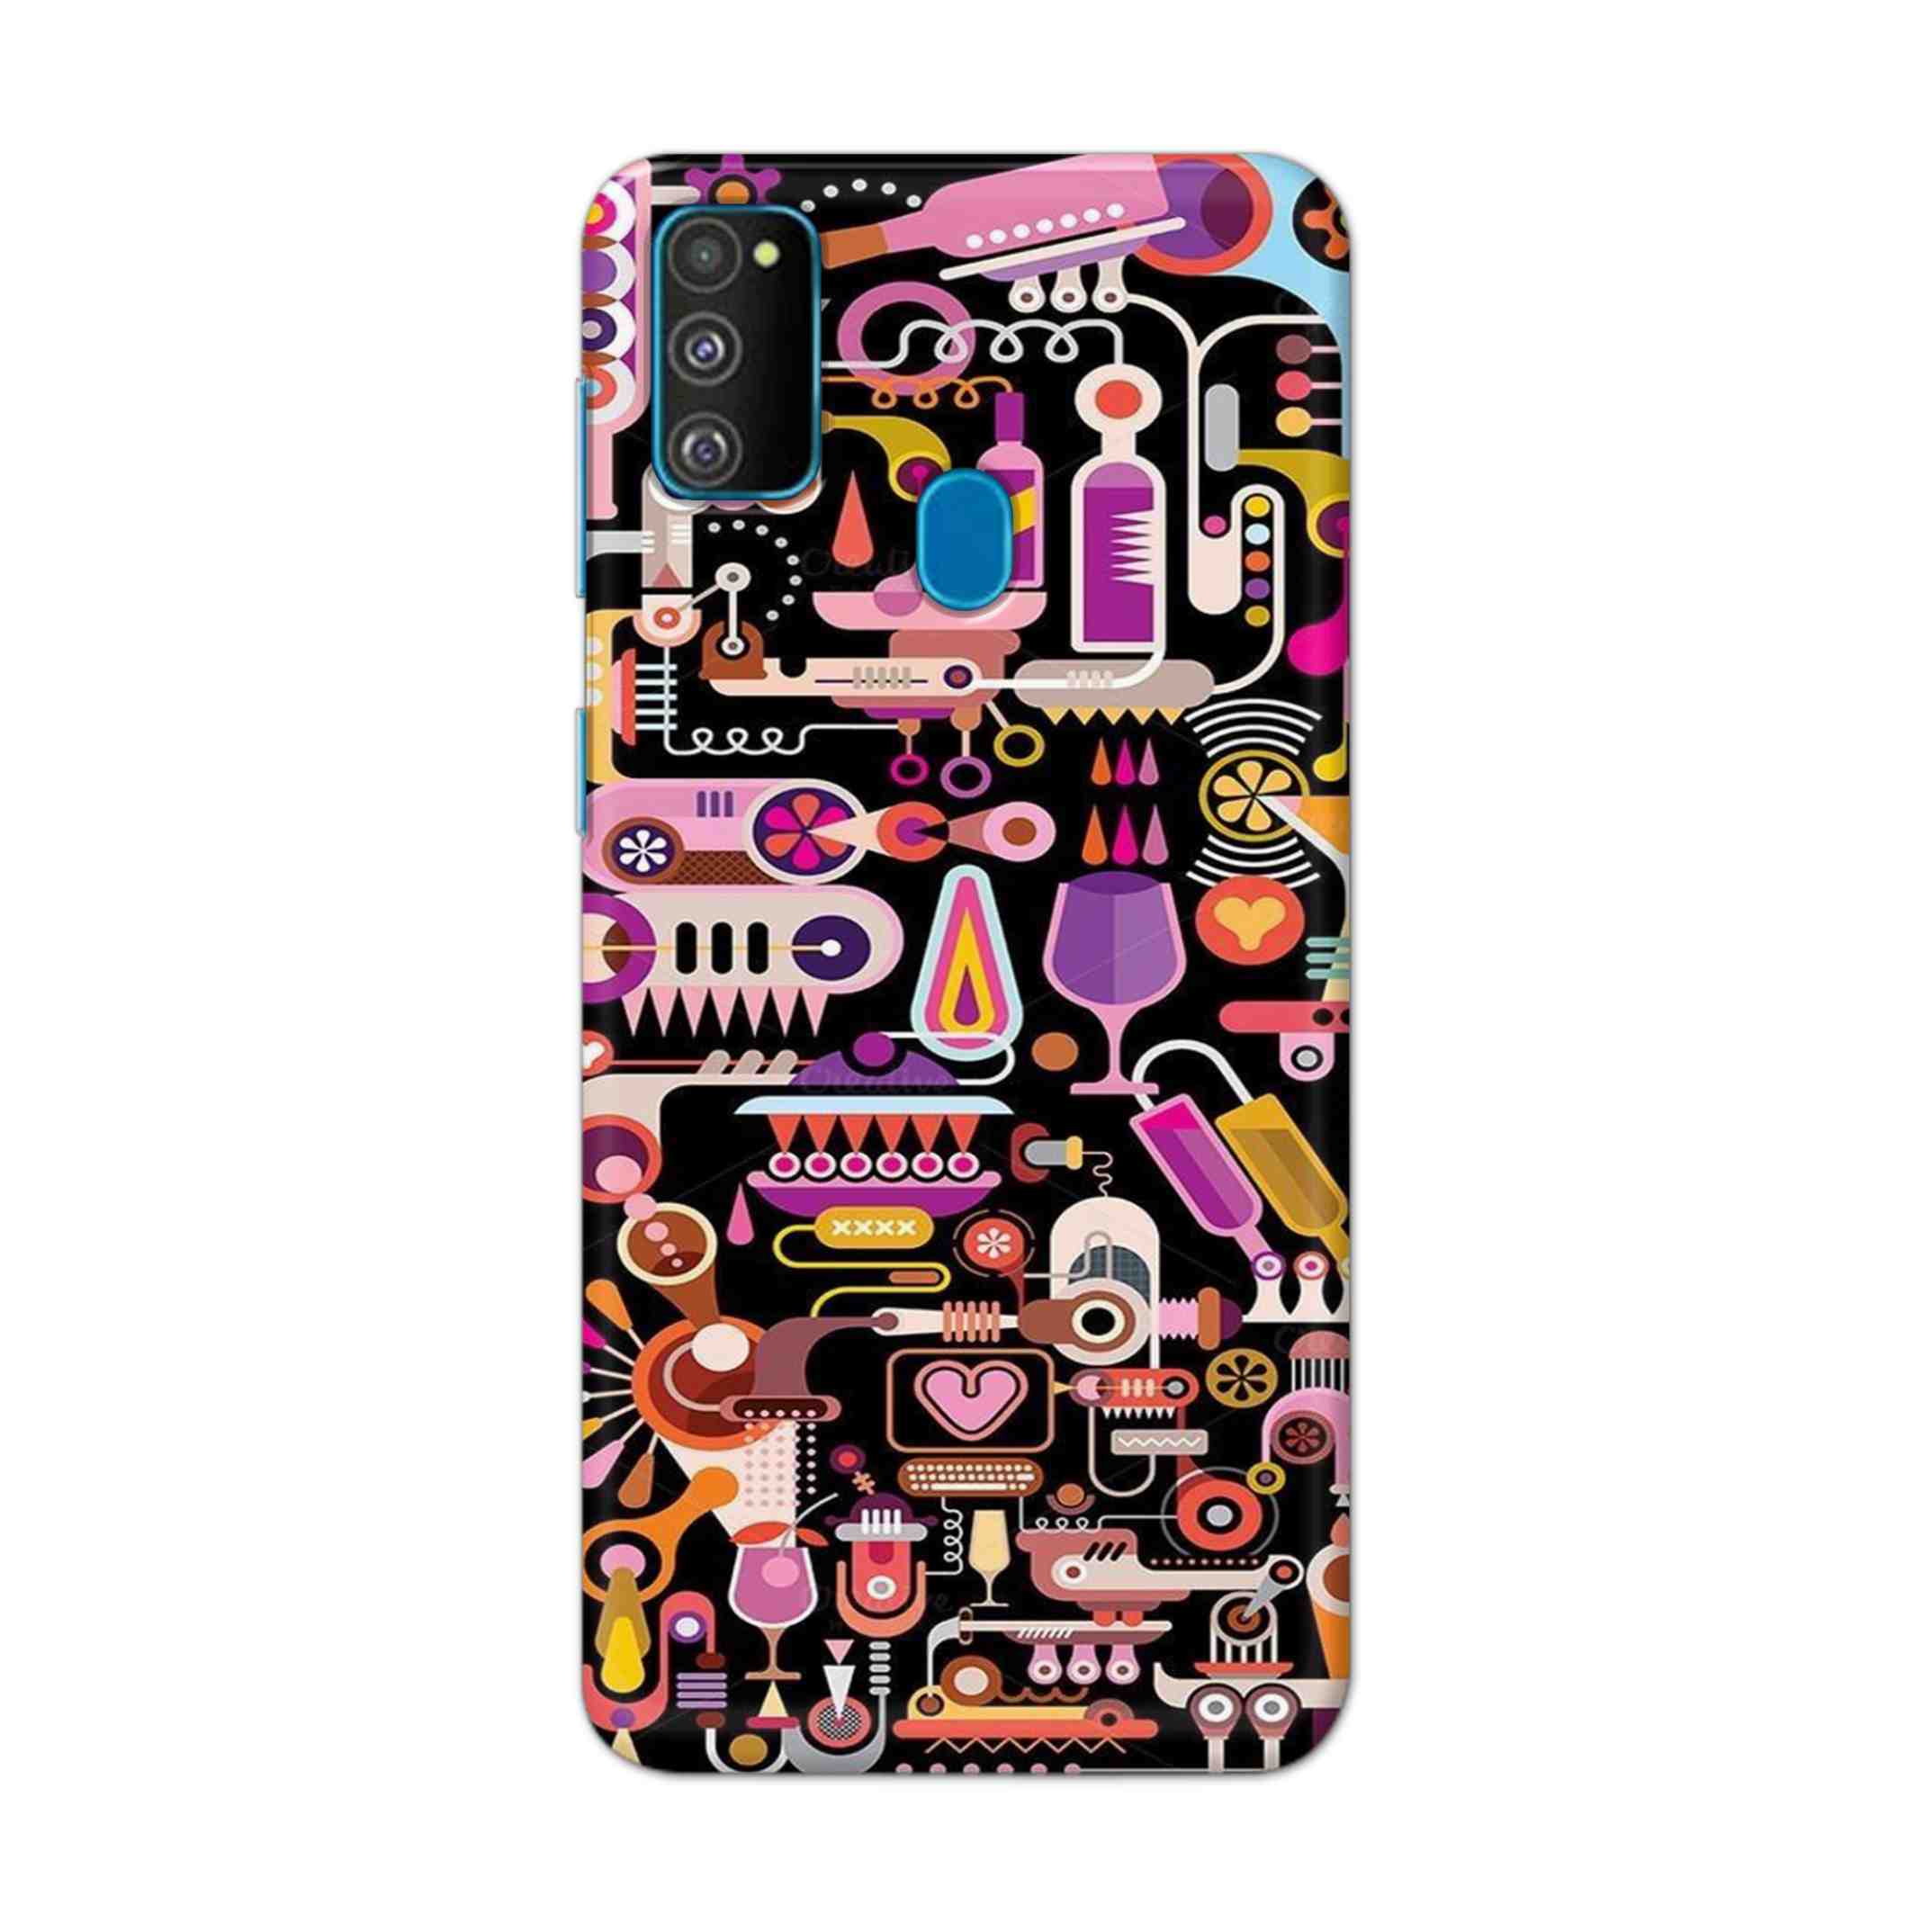 Buy Lab Art Hard Back Mobile Phone Case Cover For Samsung Galaxy M30s Online